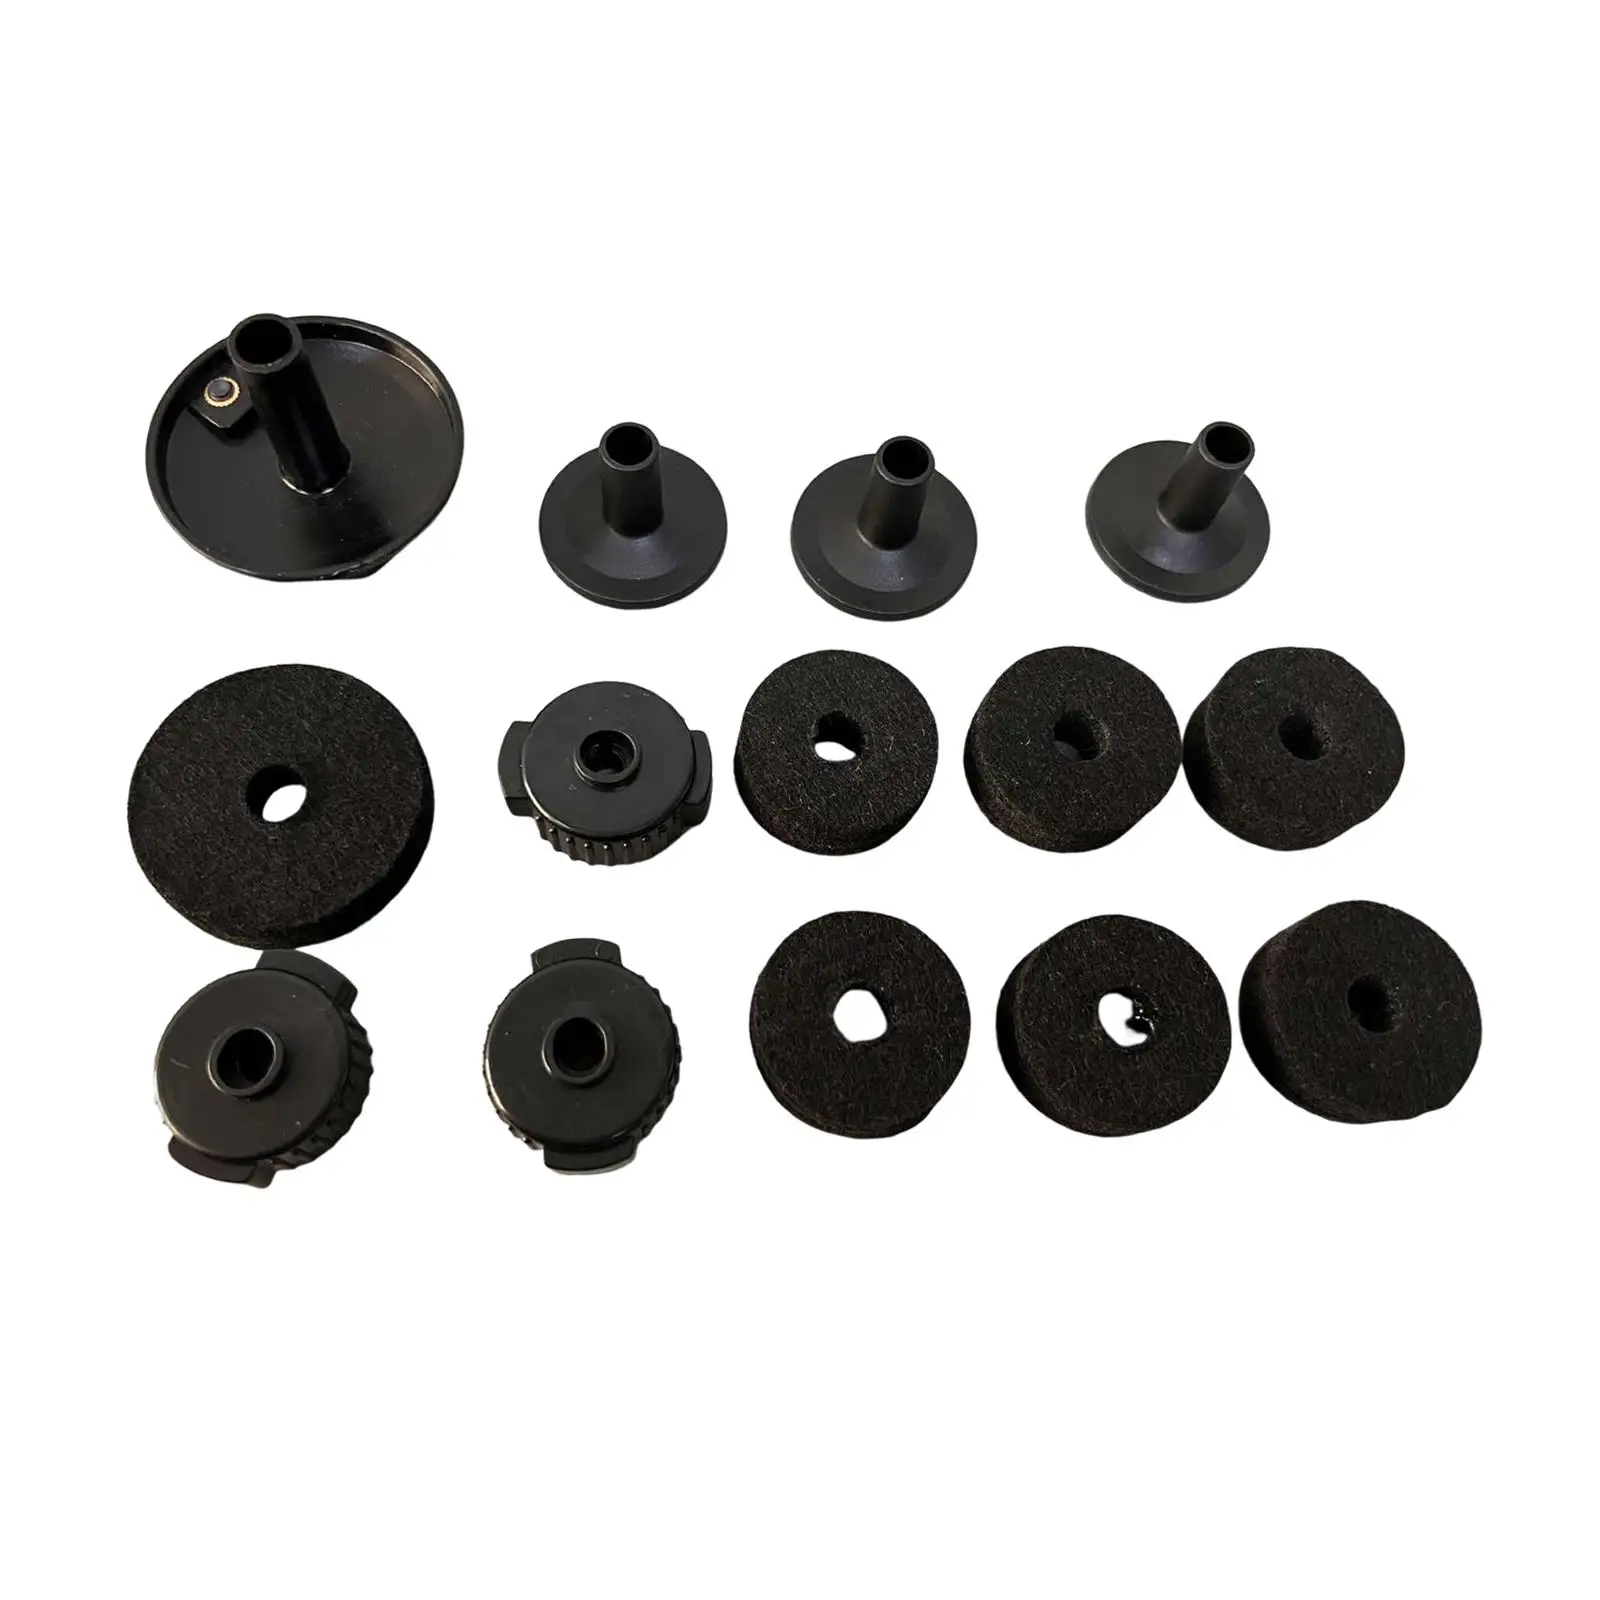 14 Pieces Drums Felt Set ,Drum Cymbal Sleeves Musical Instrument Accessories,